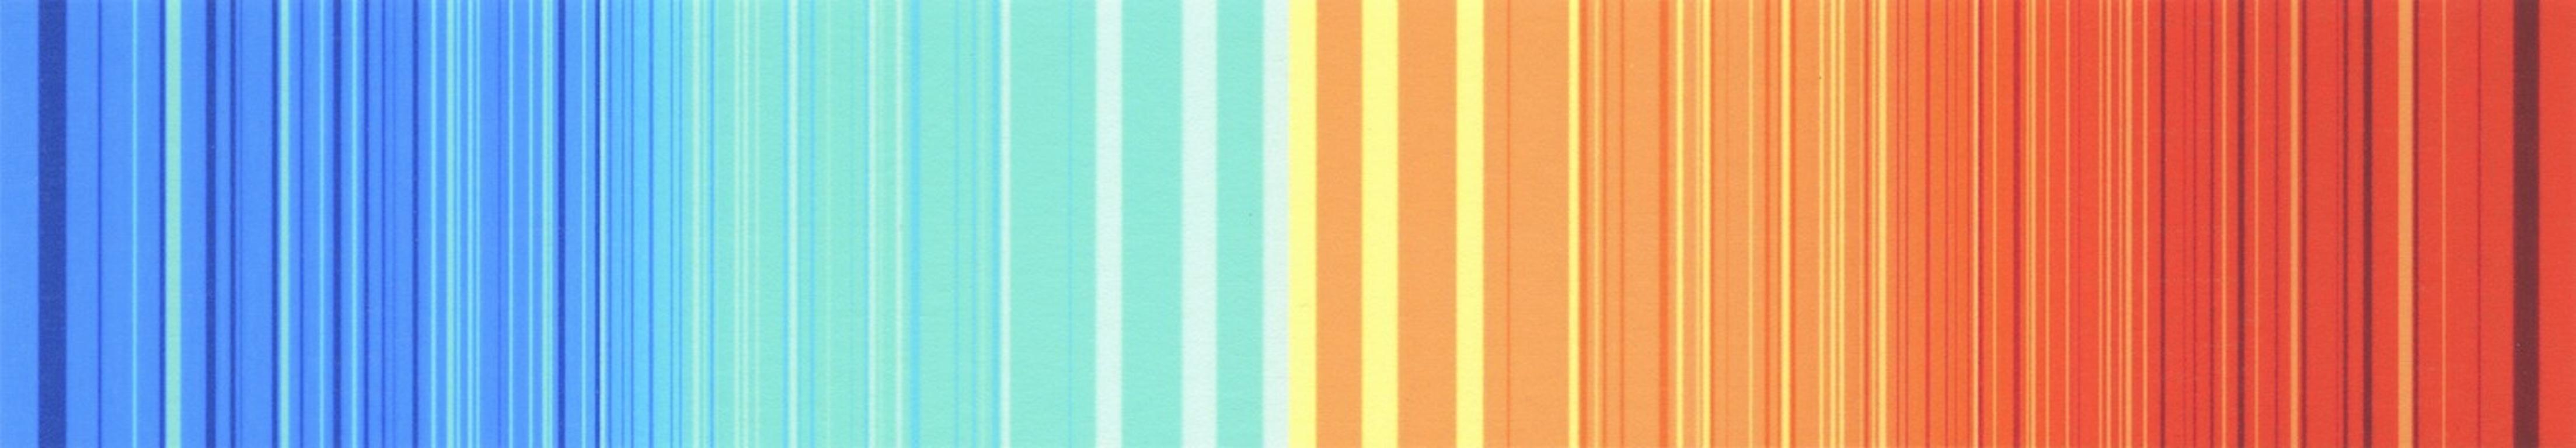 "The Complements 1", abstract, polychromatic, stripes, blue, orange, print - Print by Patty deGrandpre